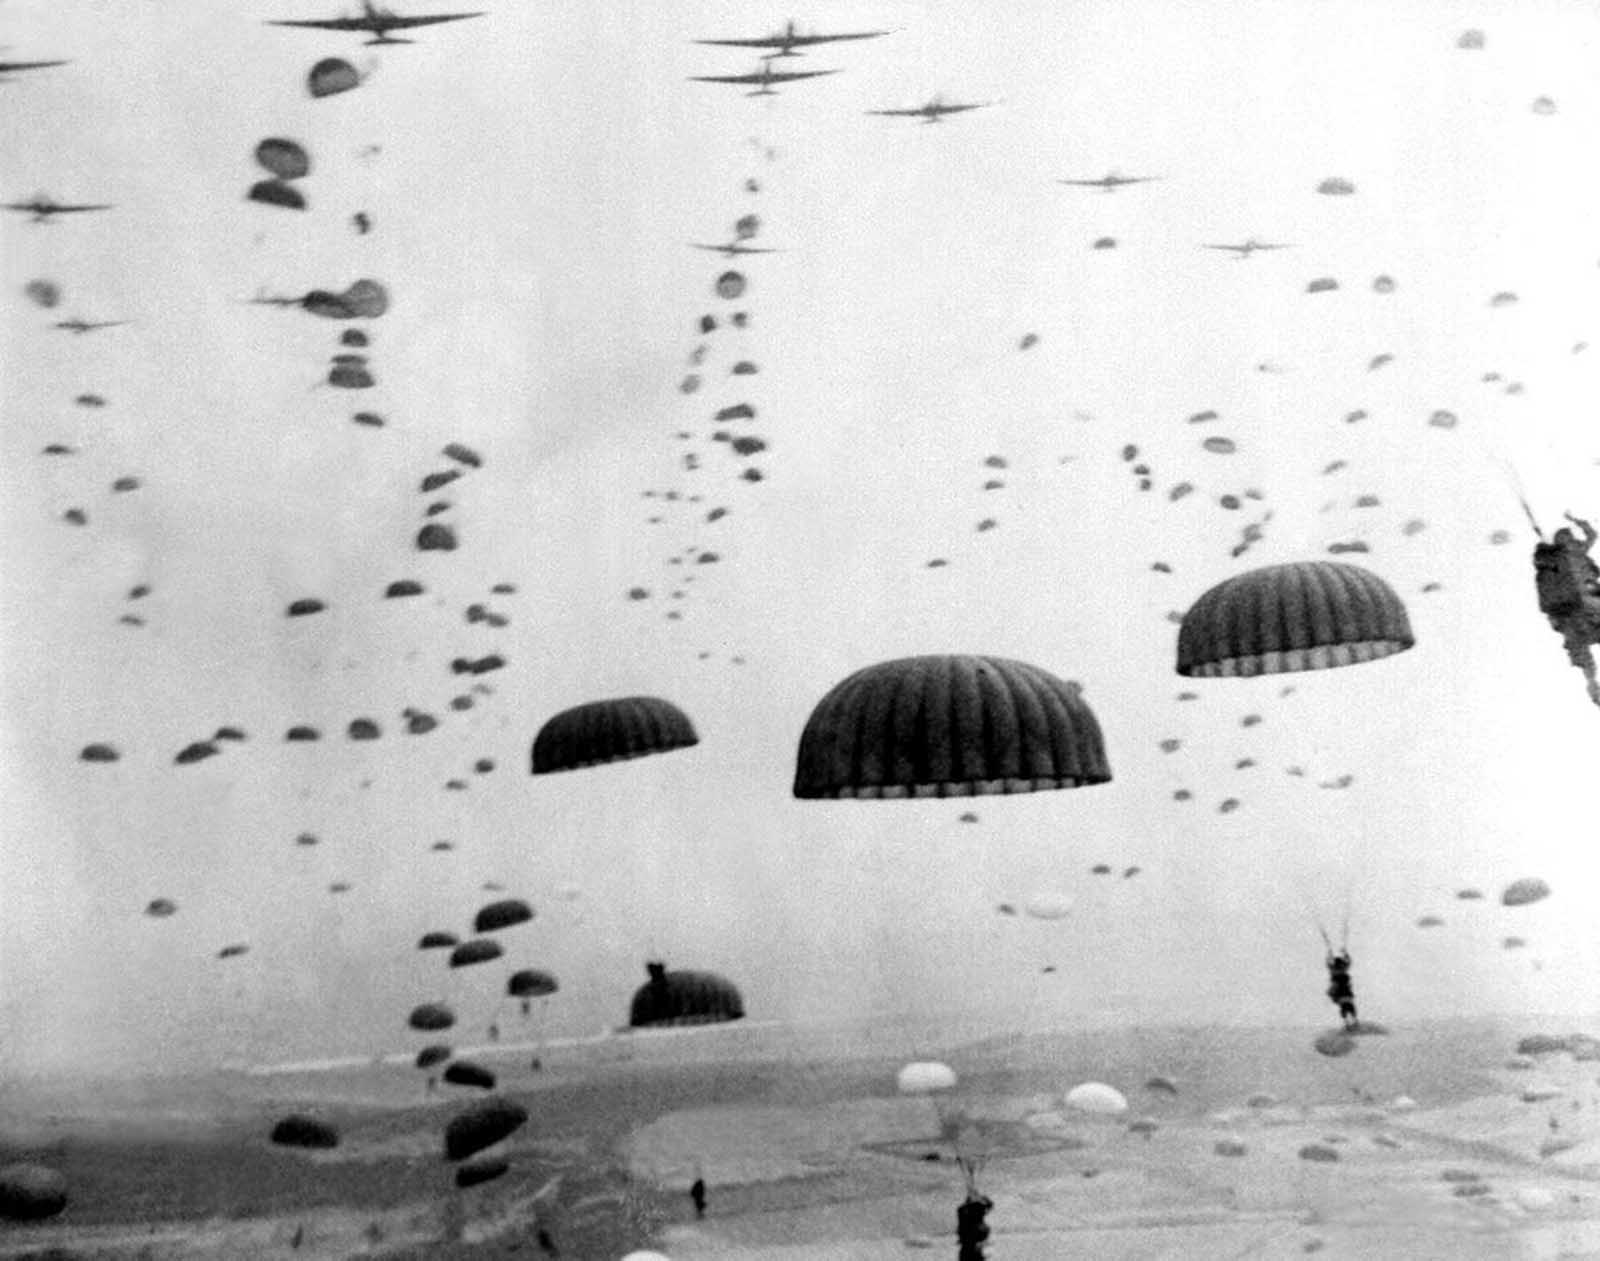 Parachutes open as waves of paratroops land in Holland during operations by the 1st Allied Airborne Army in September of 1944. Operation Market Garden was the largest airborne operation in history, with some 15,000 troops were landing by glider and another 20,000 by parachute.